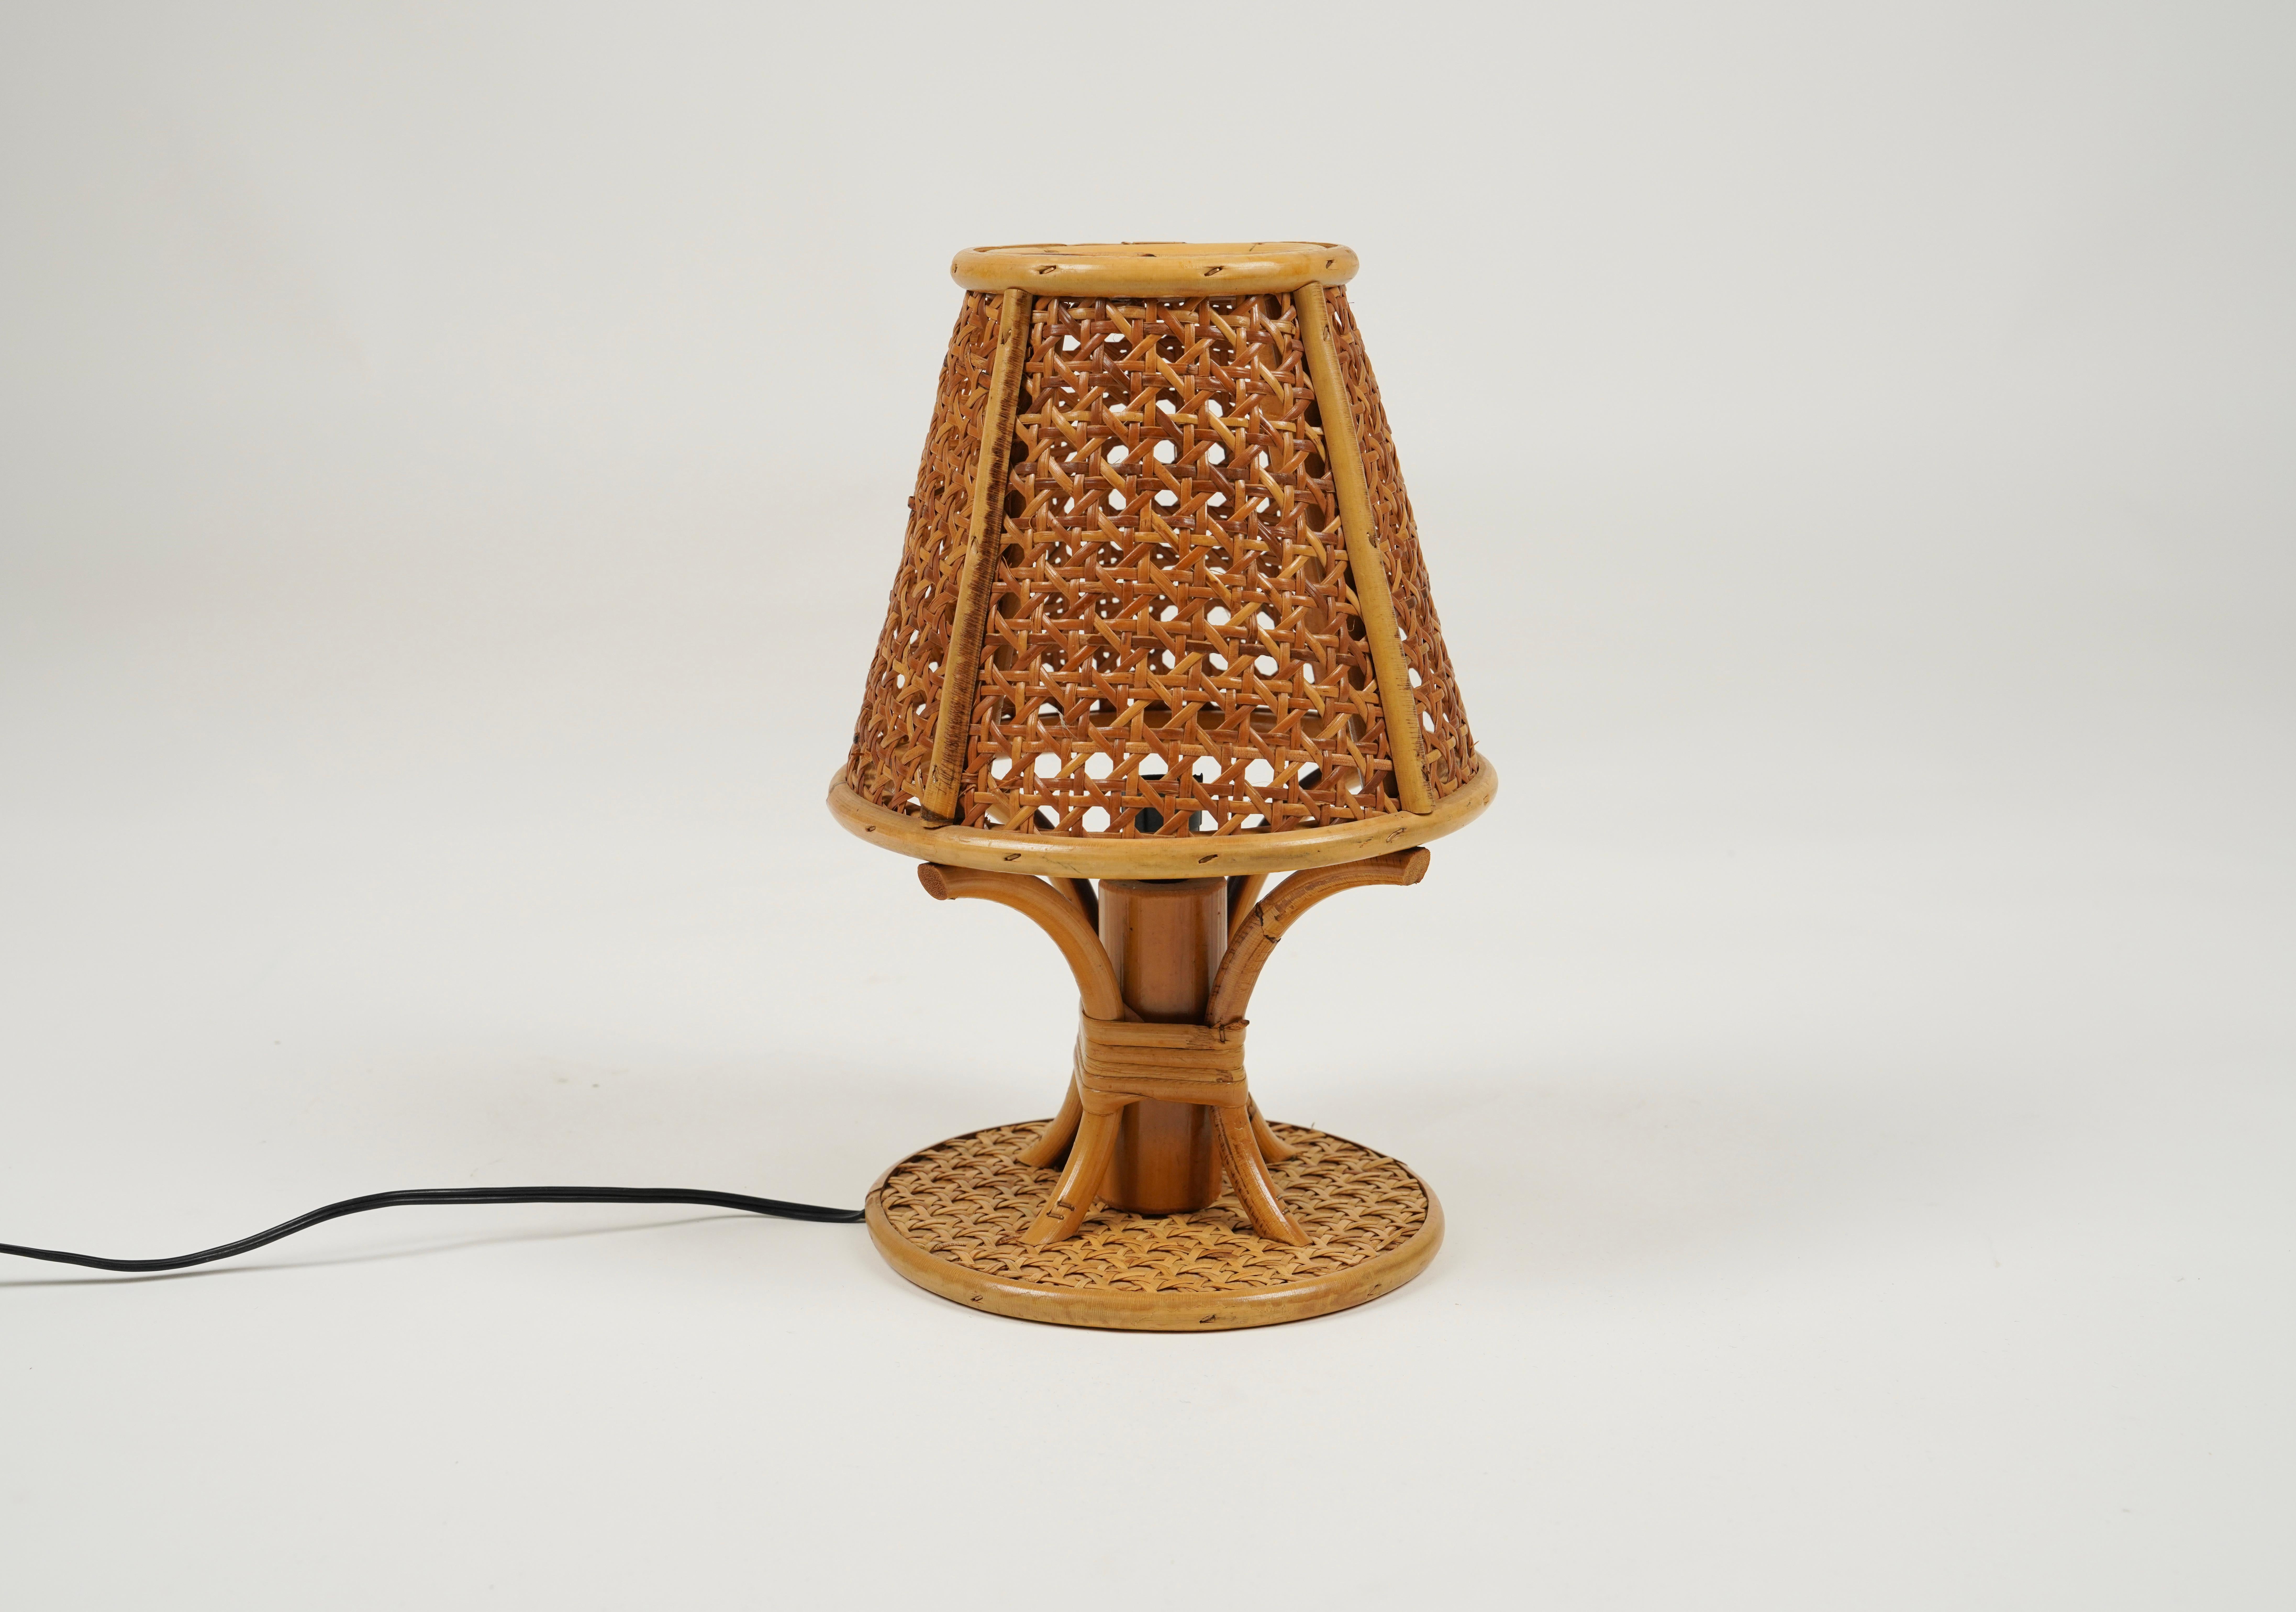 Midcentury Rattan and Wicker Table Lamp Louis Sognot Style, Italy, circa 1970s For Sale 1